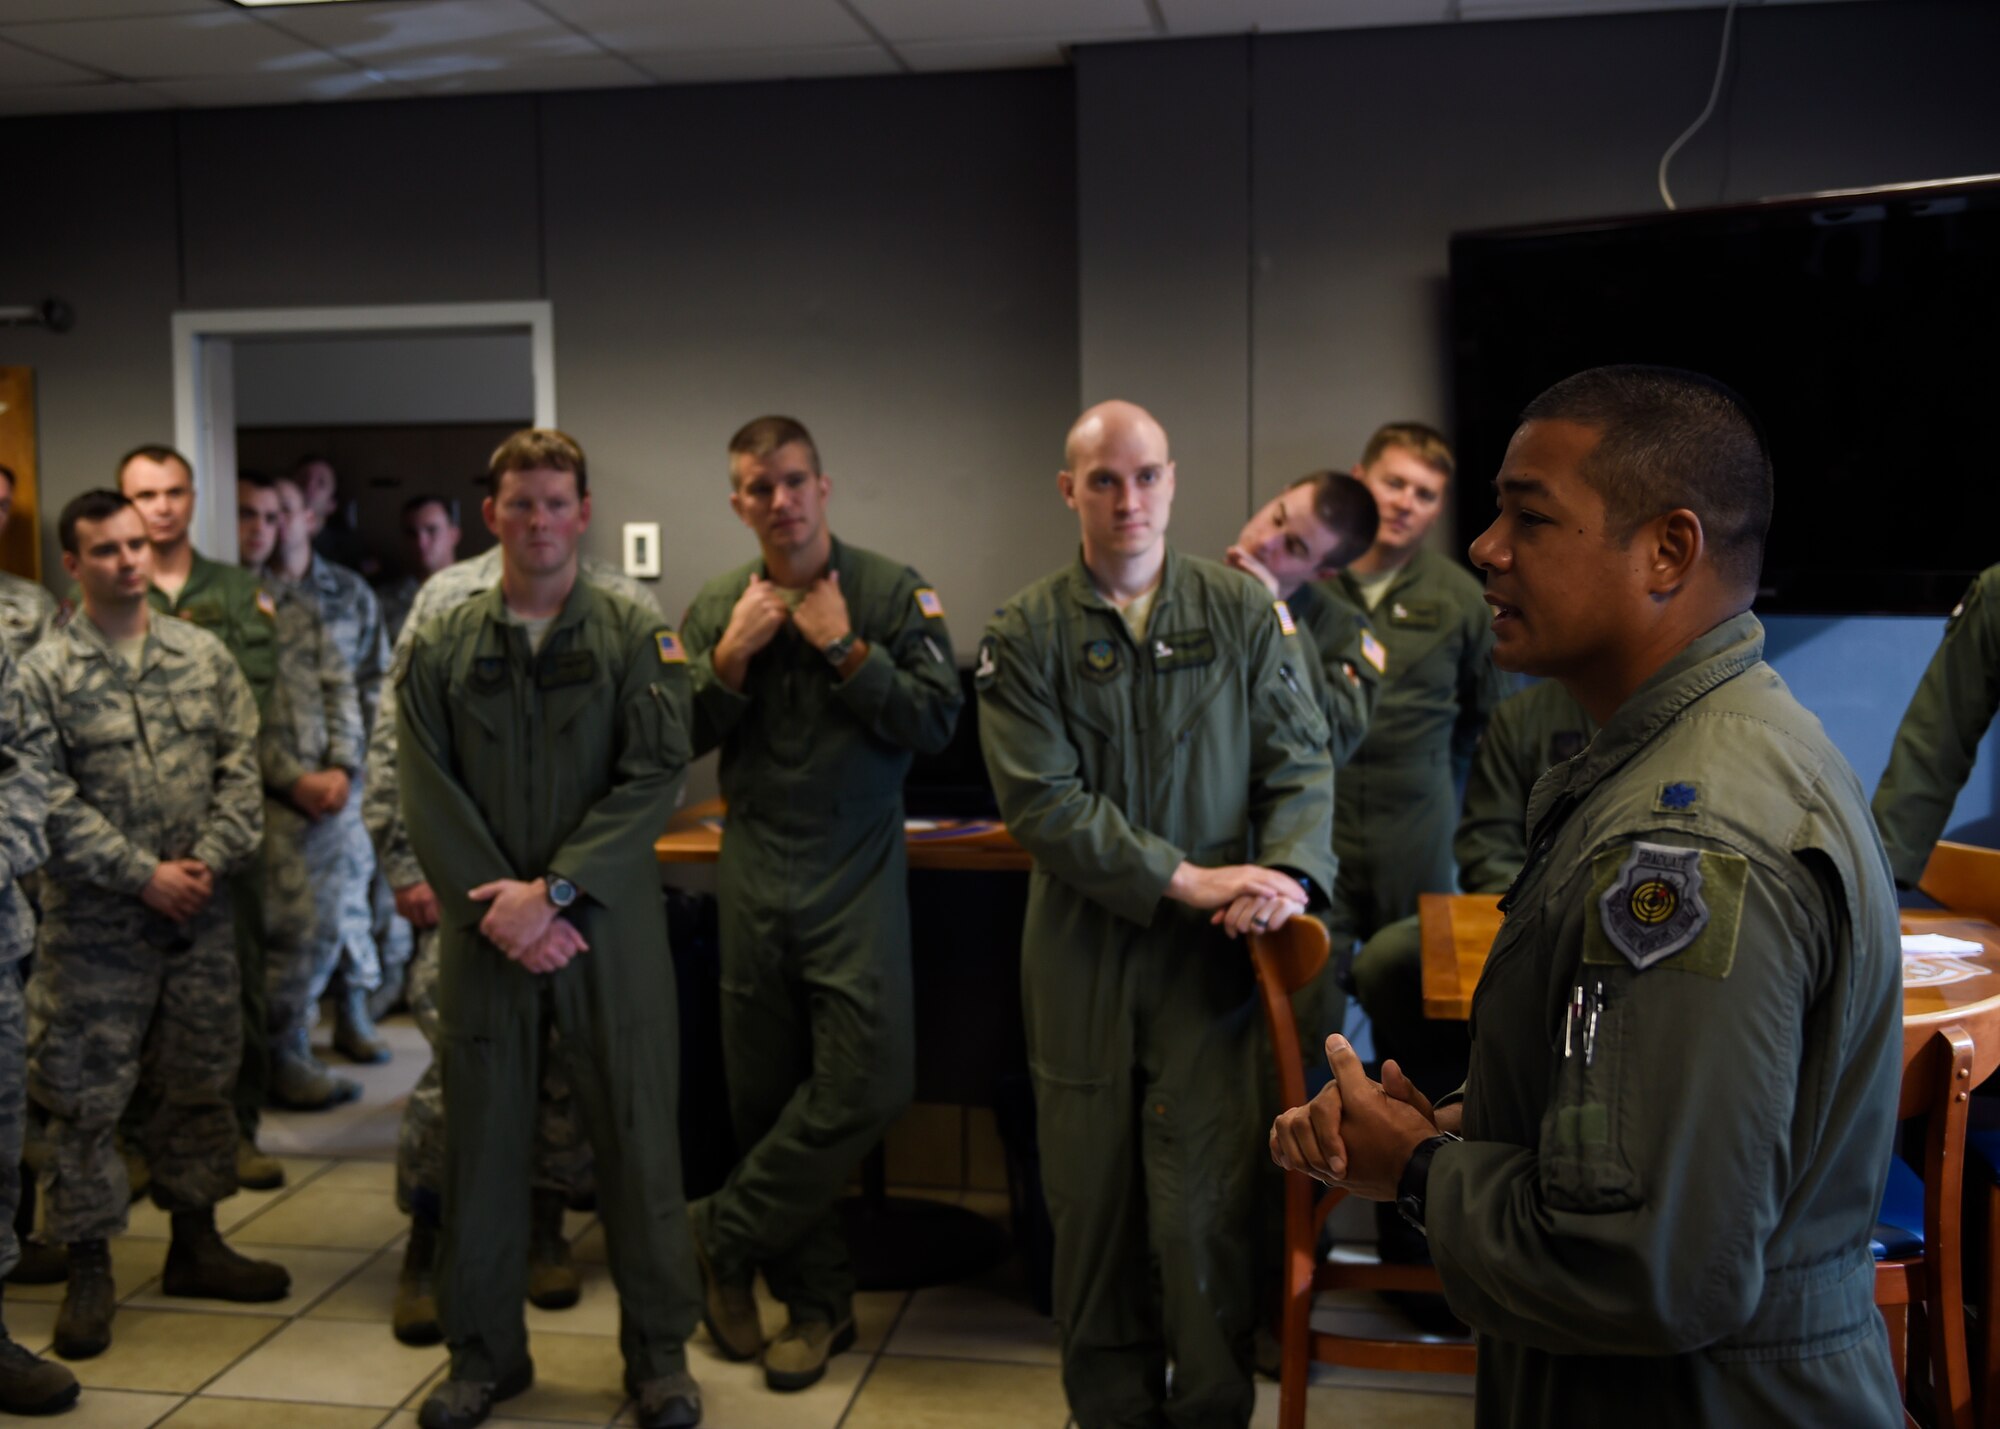 Lt. Col. Derrick Barton, 4th Special Operations Squadron commander, speaks at the first AC-130U Spooky retirement at Hurlburt Field, Fla., Sept. 21, 2015. On July 21, 2011, “Bad Omen” had one of its most successful sorties over Afghanistan. The aircraft arrived on station to support a task force that was infiltrating a compound area when the task force started taking fire from all sides. The gunship began to take direct action, and true to “U” model form, the crew performed eight separate engagements using infrared and TV dual-target attacks firing 146, 40mm cannon rounds and 41, 105mm howitzer rounds to end the engagement. (U.S. Air Force photo by Airman Kai White)